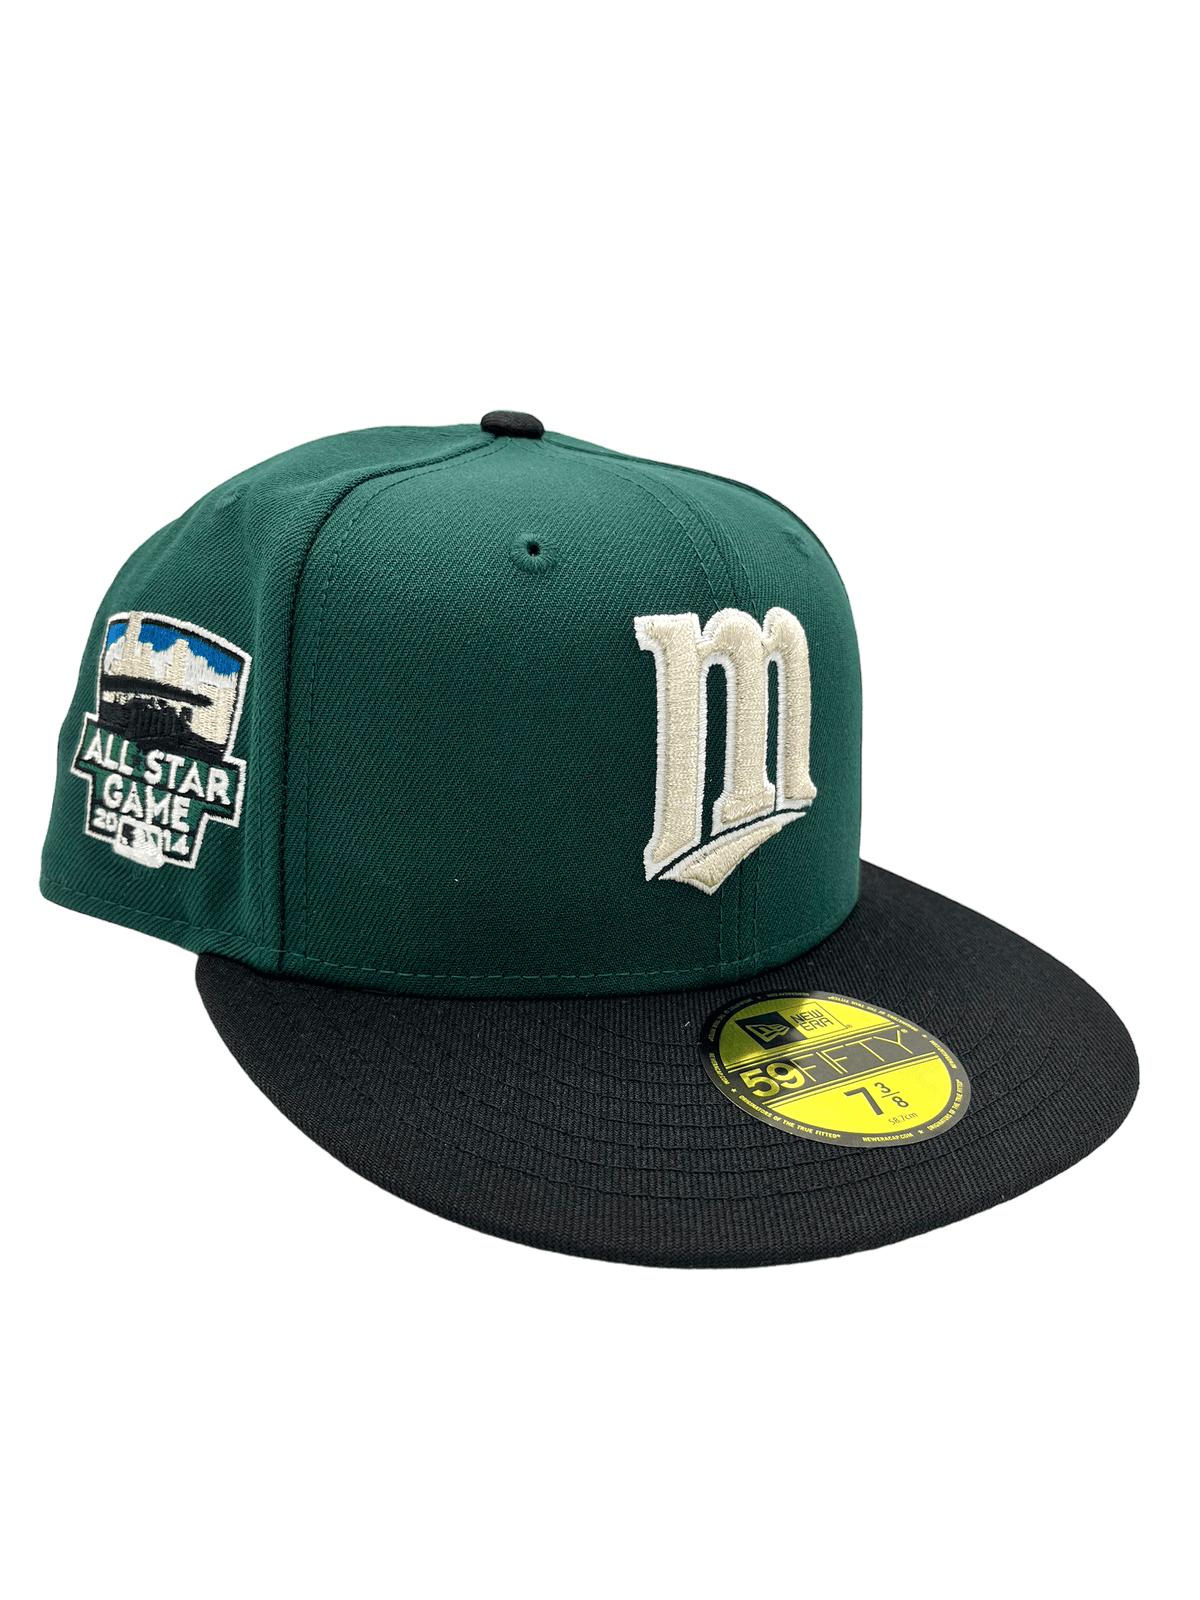 New Era Authentic MLB San Diego Padres Navy 1991 Cooperstown Fitted Hat Cap  59Fifty